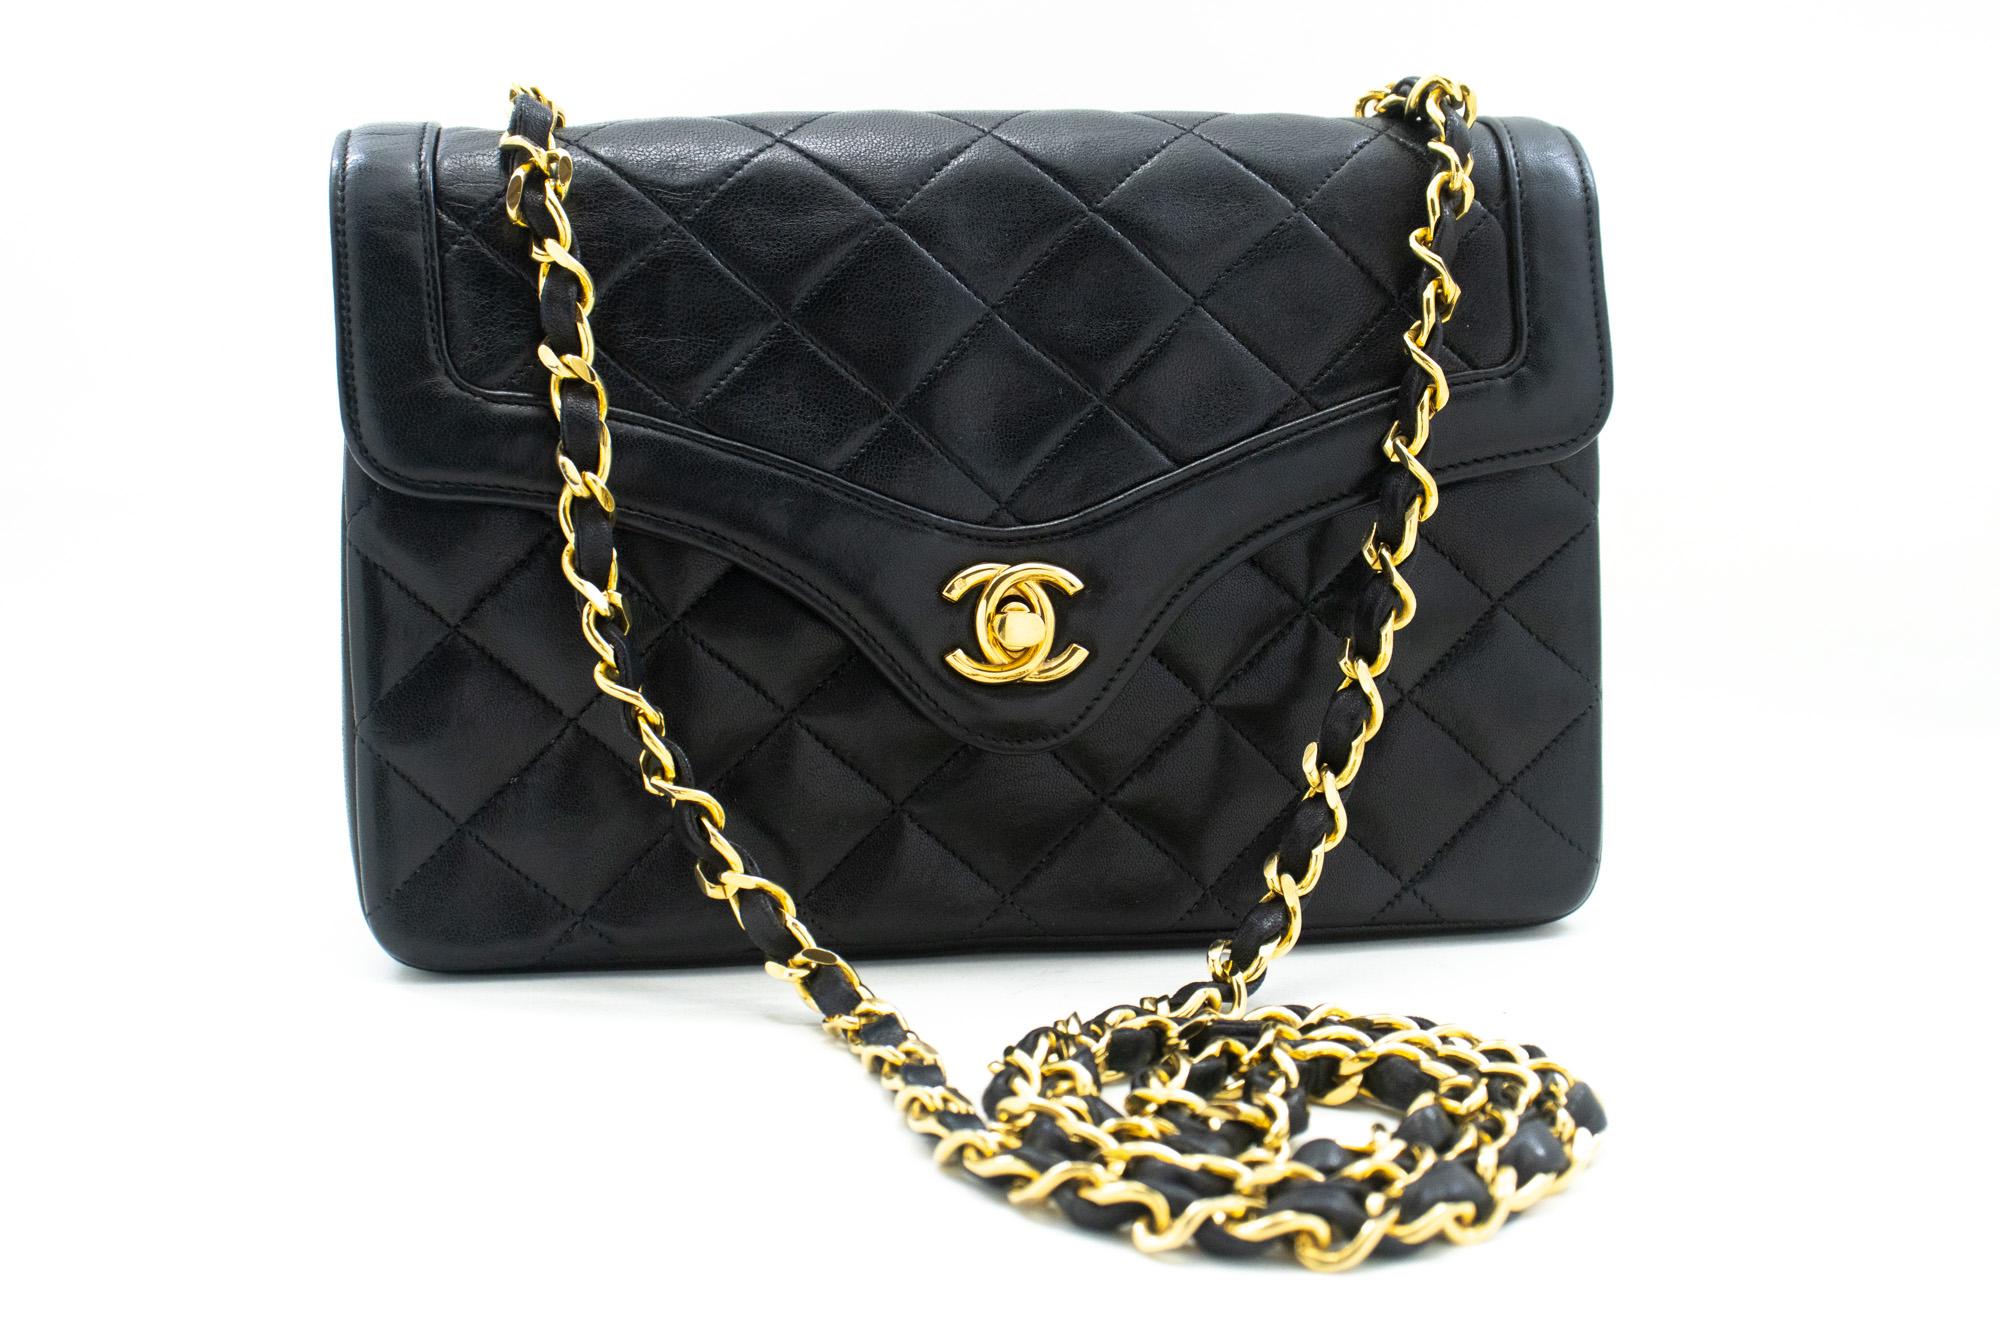 An authentic CHANEL Small Single Flap Chain Shoulder Bag Black Quilted made of black Lambskin. The color is Black. The outside material is Leather. The pattern is Solid. This item is Vintage / Classic. The year of manufacture would be